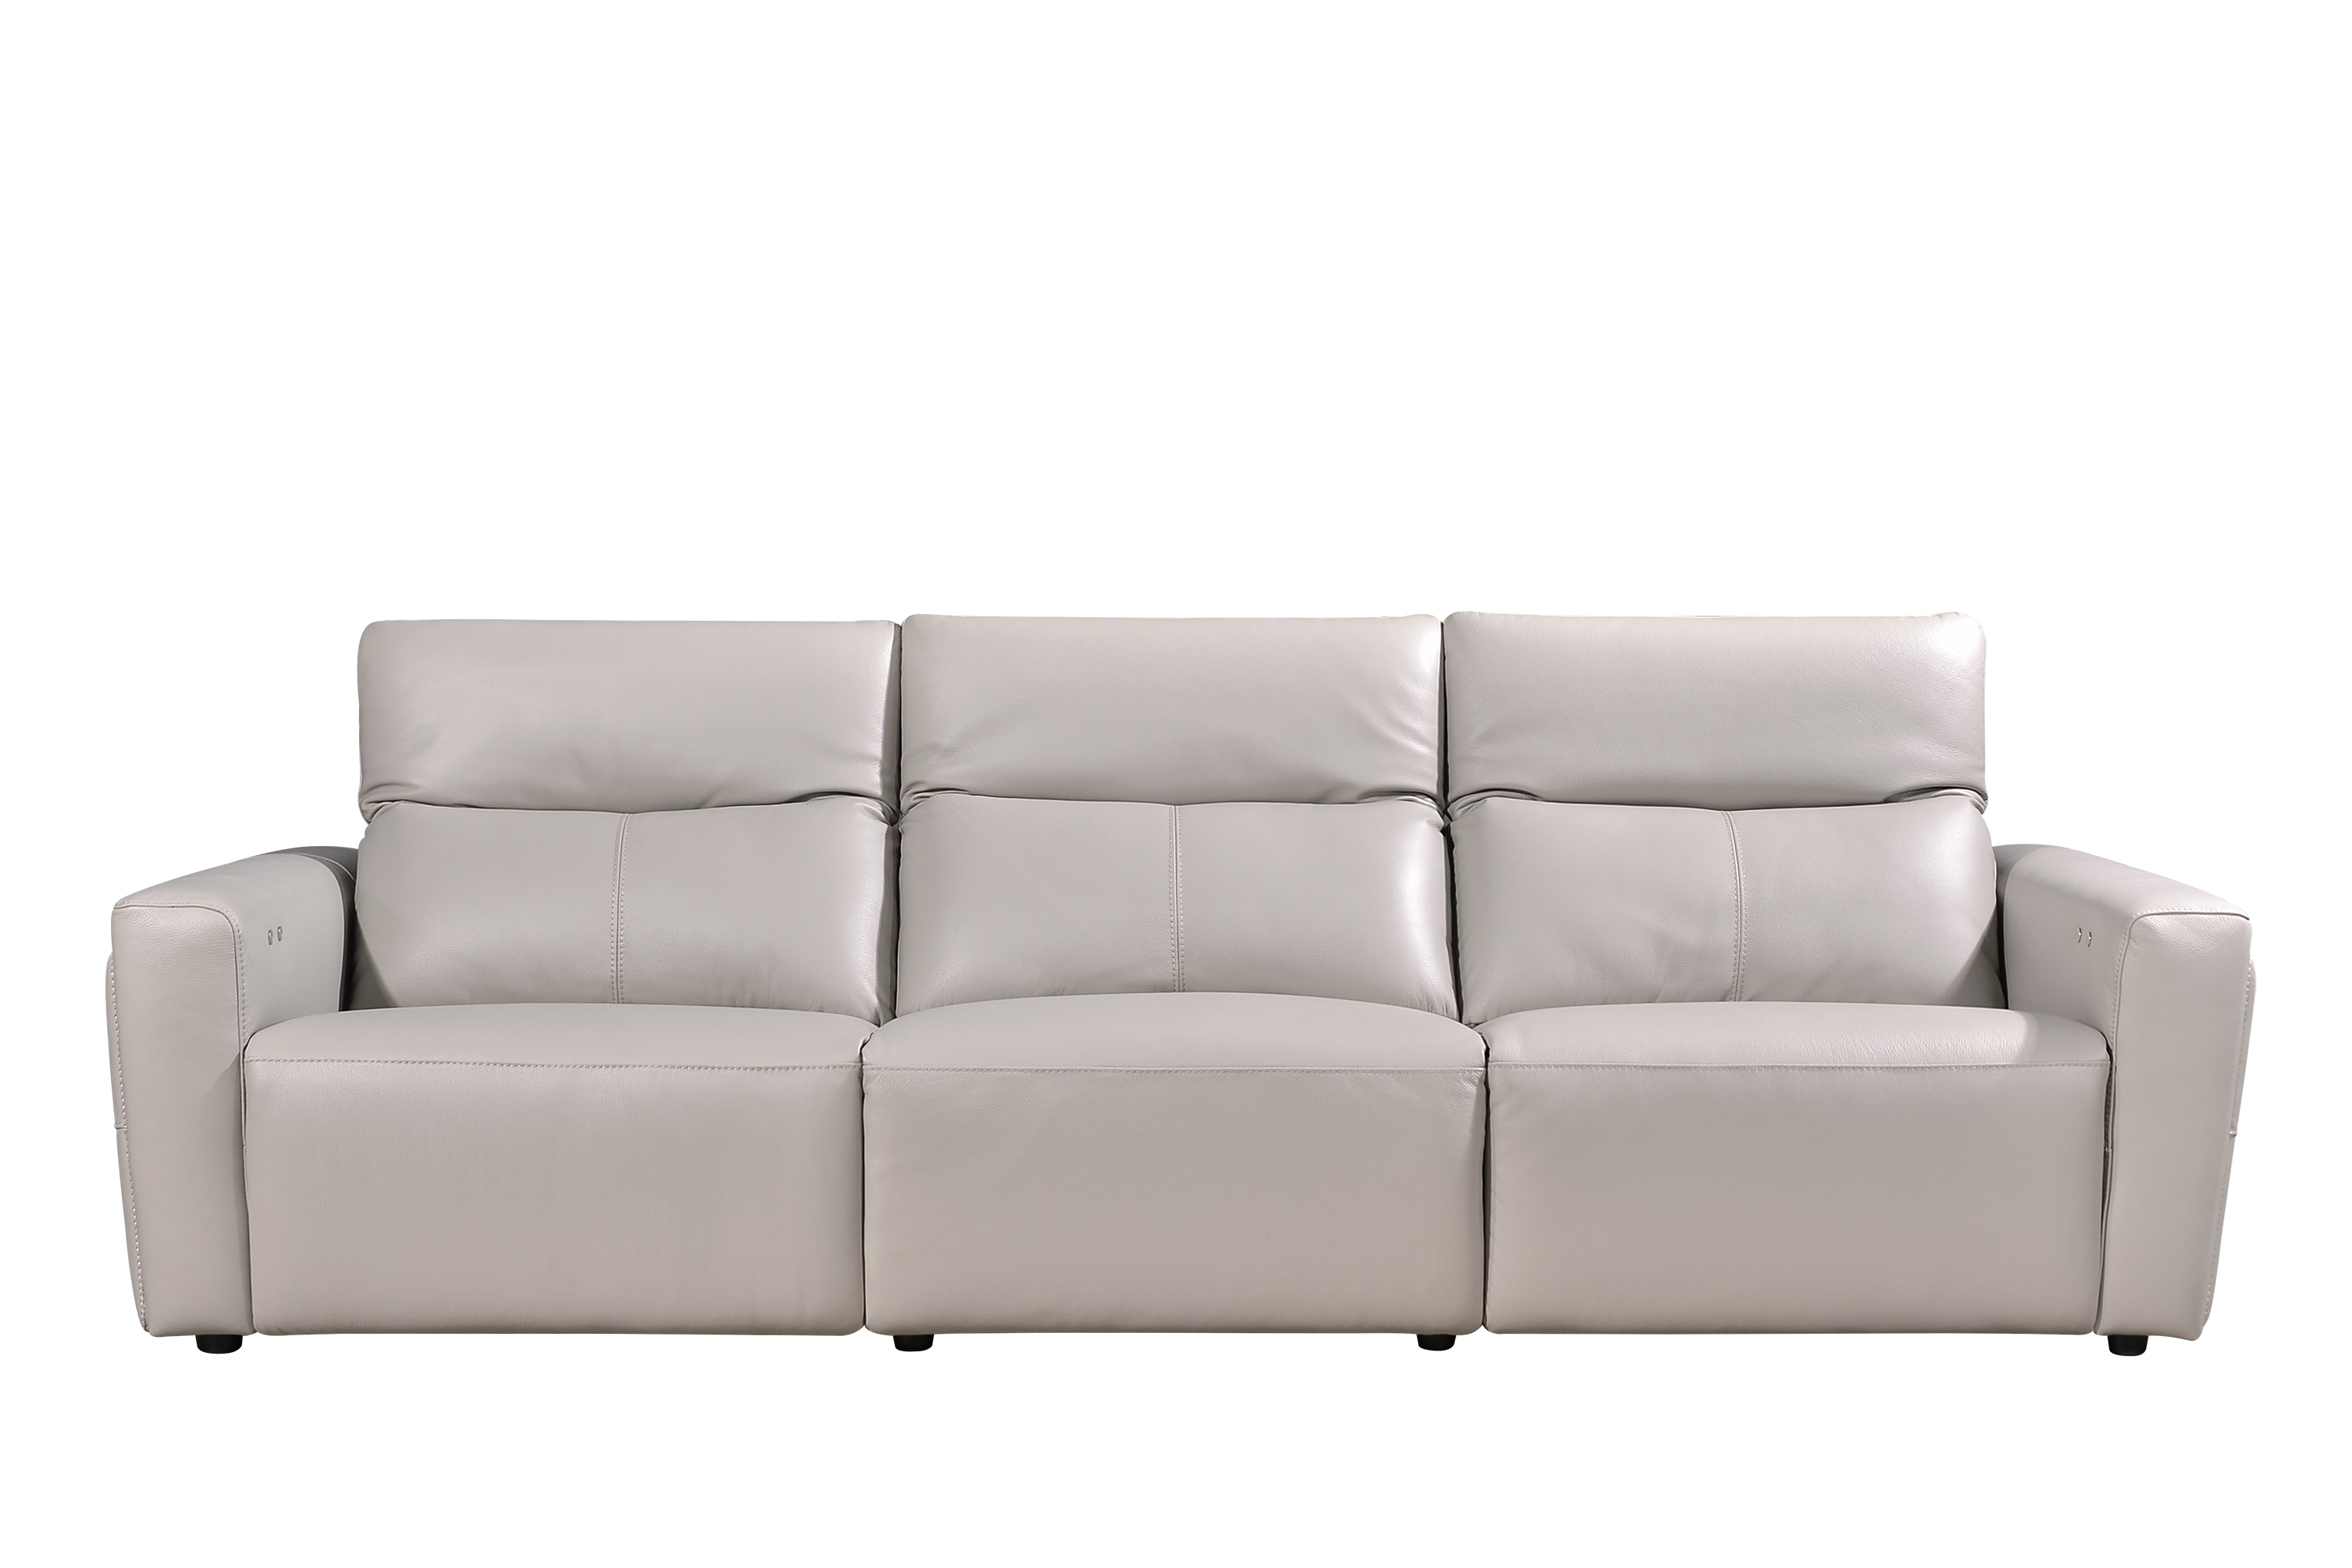 VINCI 3.5 Seater Recliner Sofa in Leather by Castilla